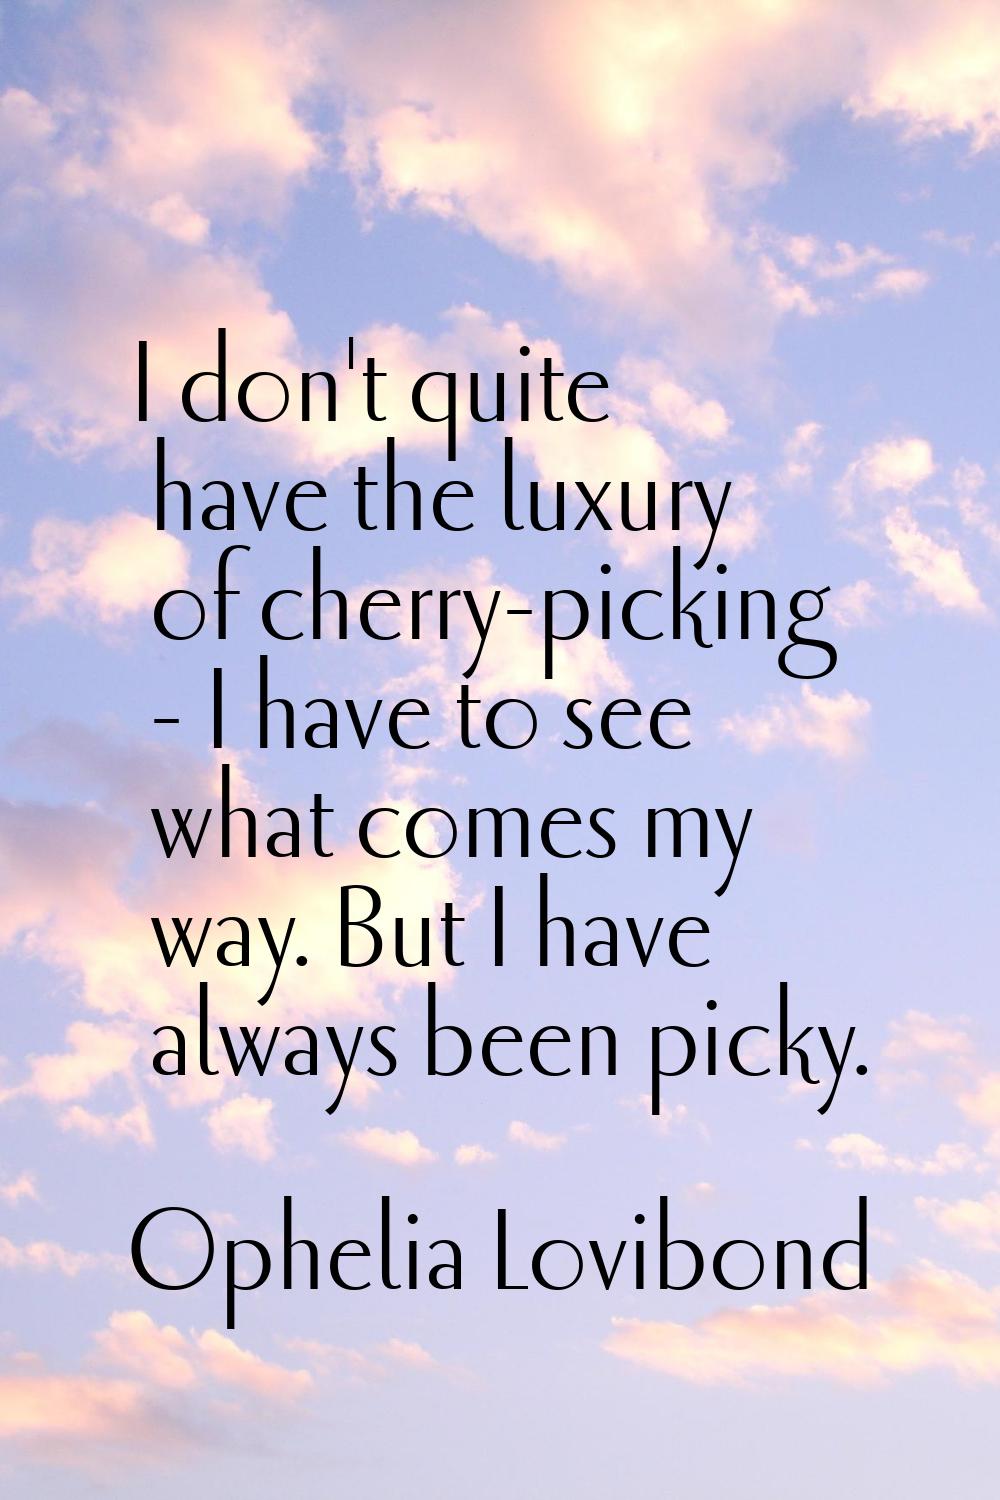 I don't quite have the luxury of cherry-picking - I have to see what comes my way. But I have alway